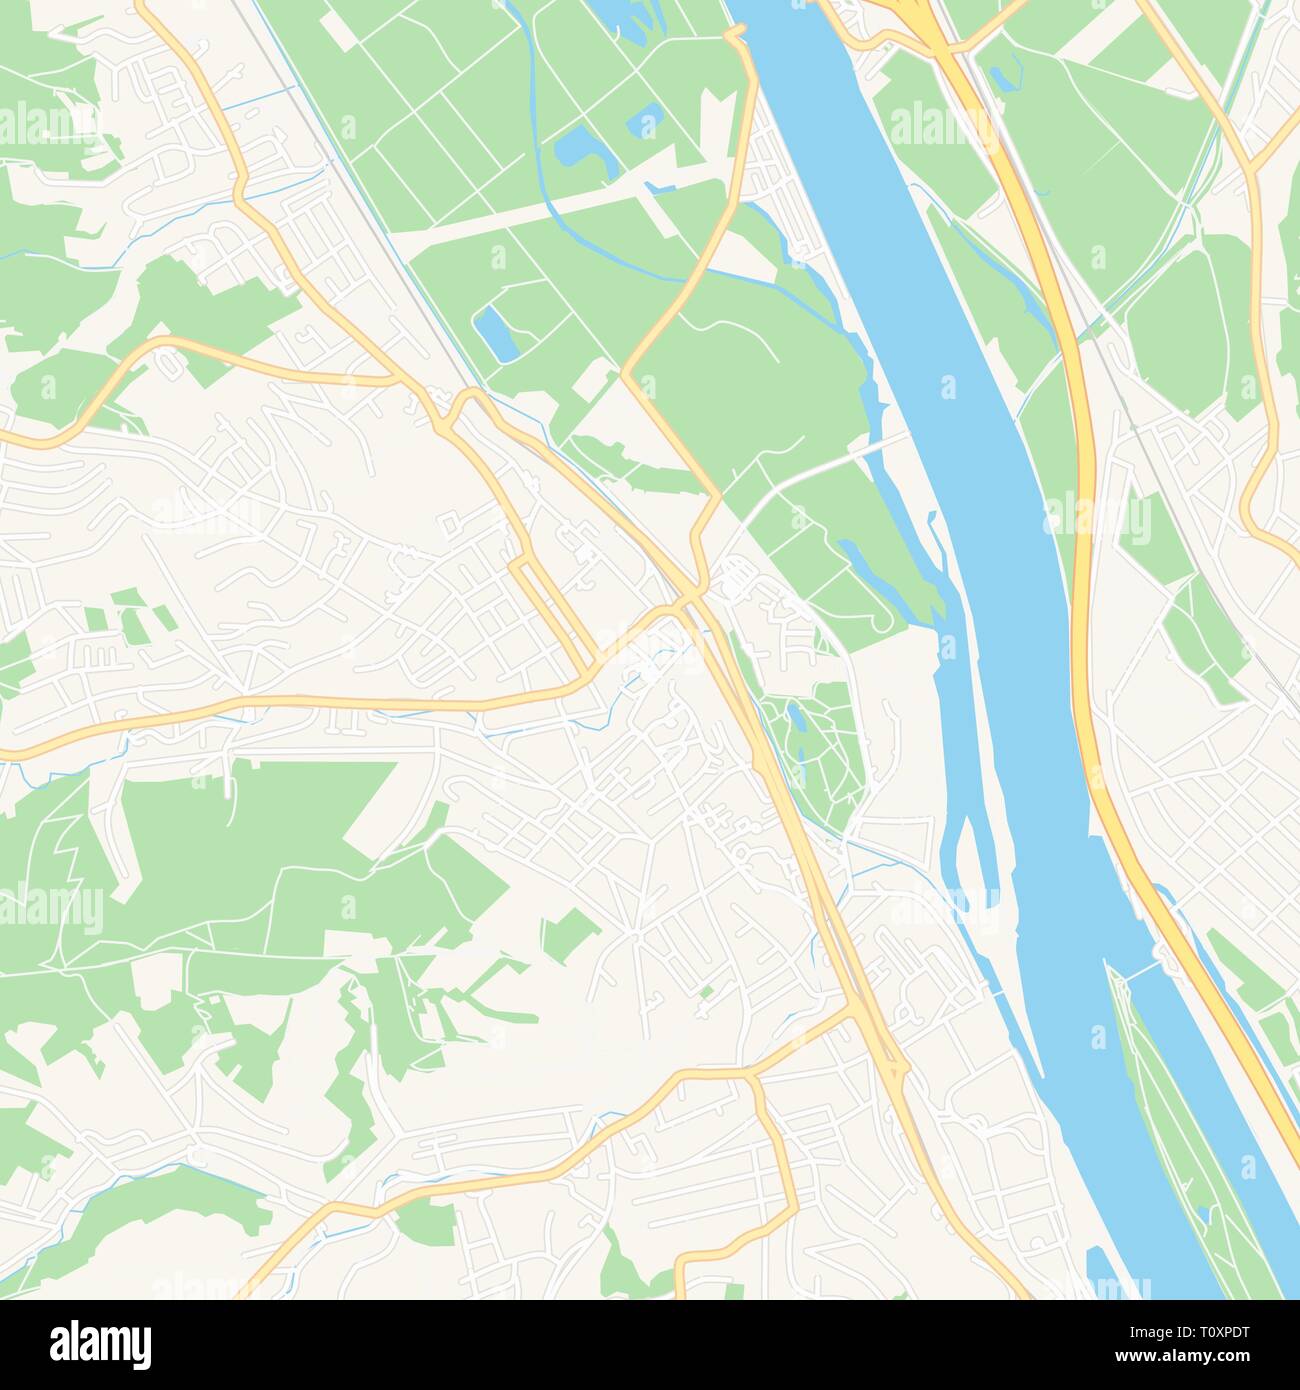 Printable map of Klosterneuburg, Austria with main and secondary roads and larger railways. This map is carefully designed for routing and placing ind Stock Vector